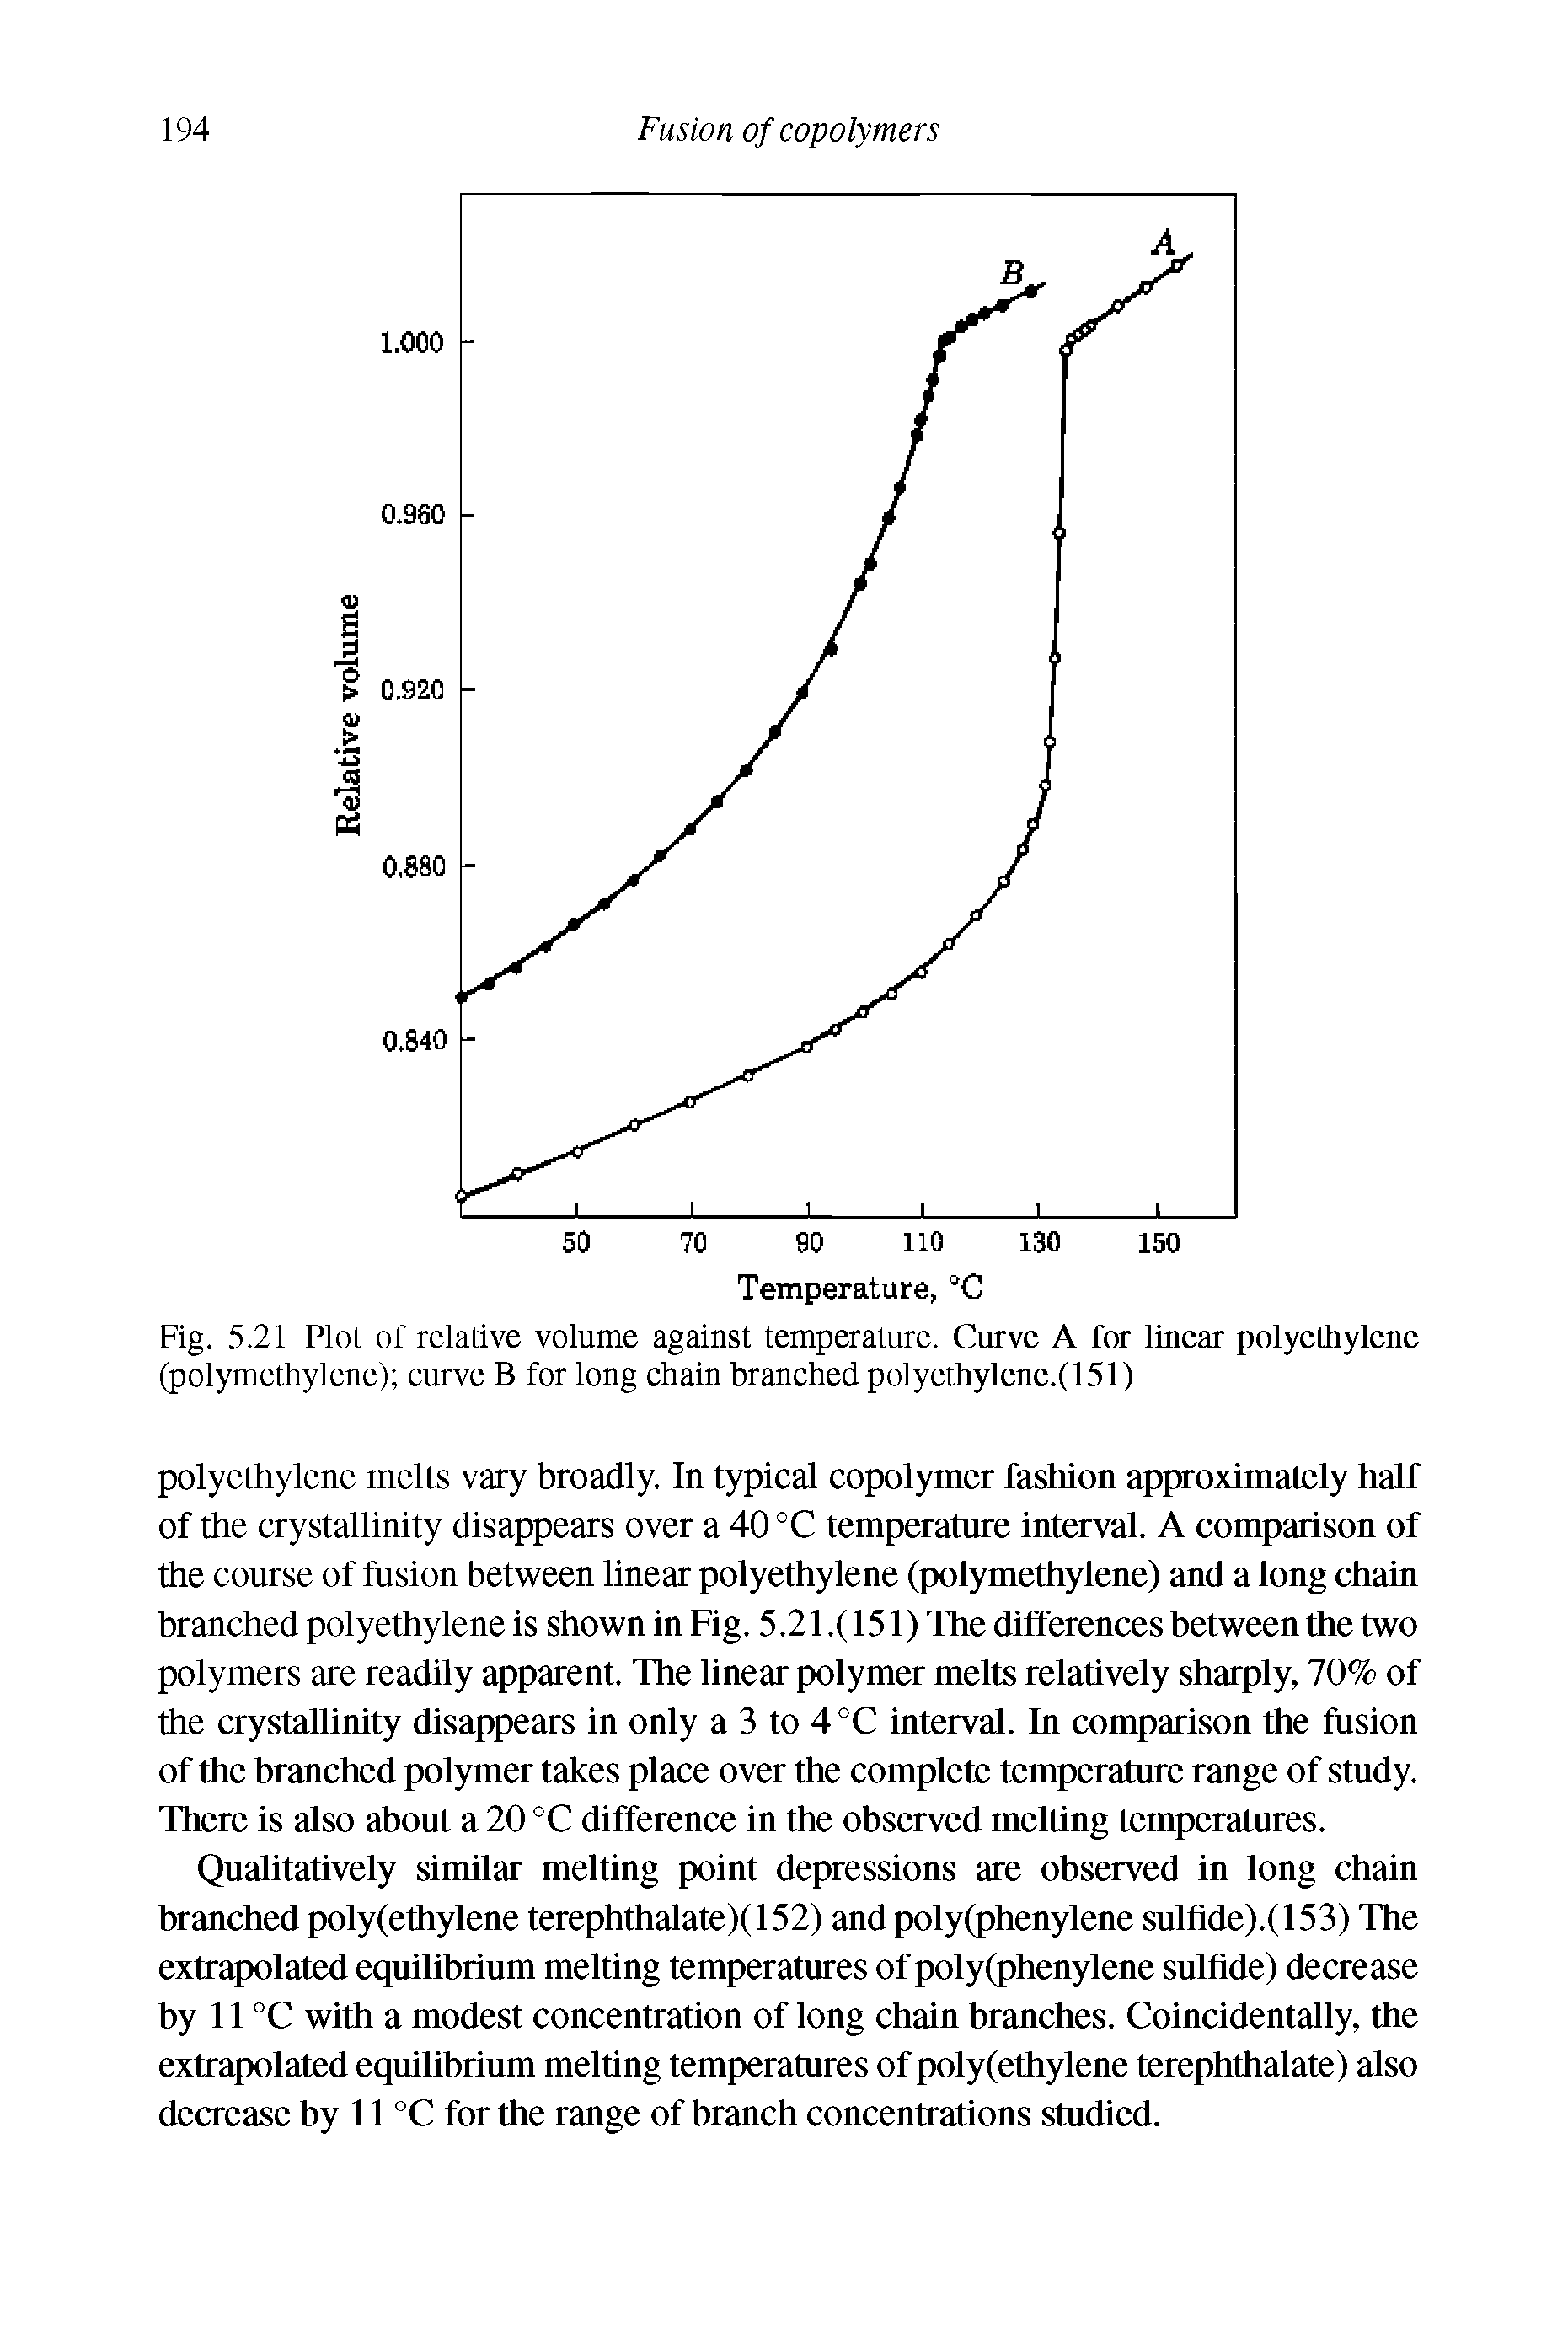 Fig. 5.21 Plot of relative volume against temperature. Curve A for linear polyethylene (polymethylene) curve B for long chain branched polyethylene.(151)...